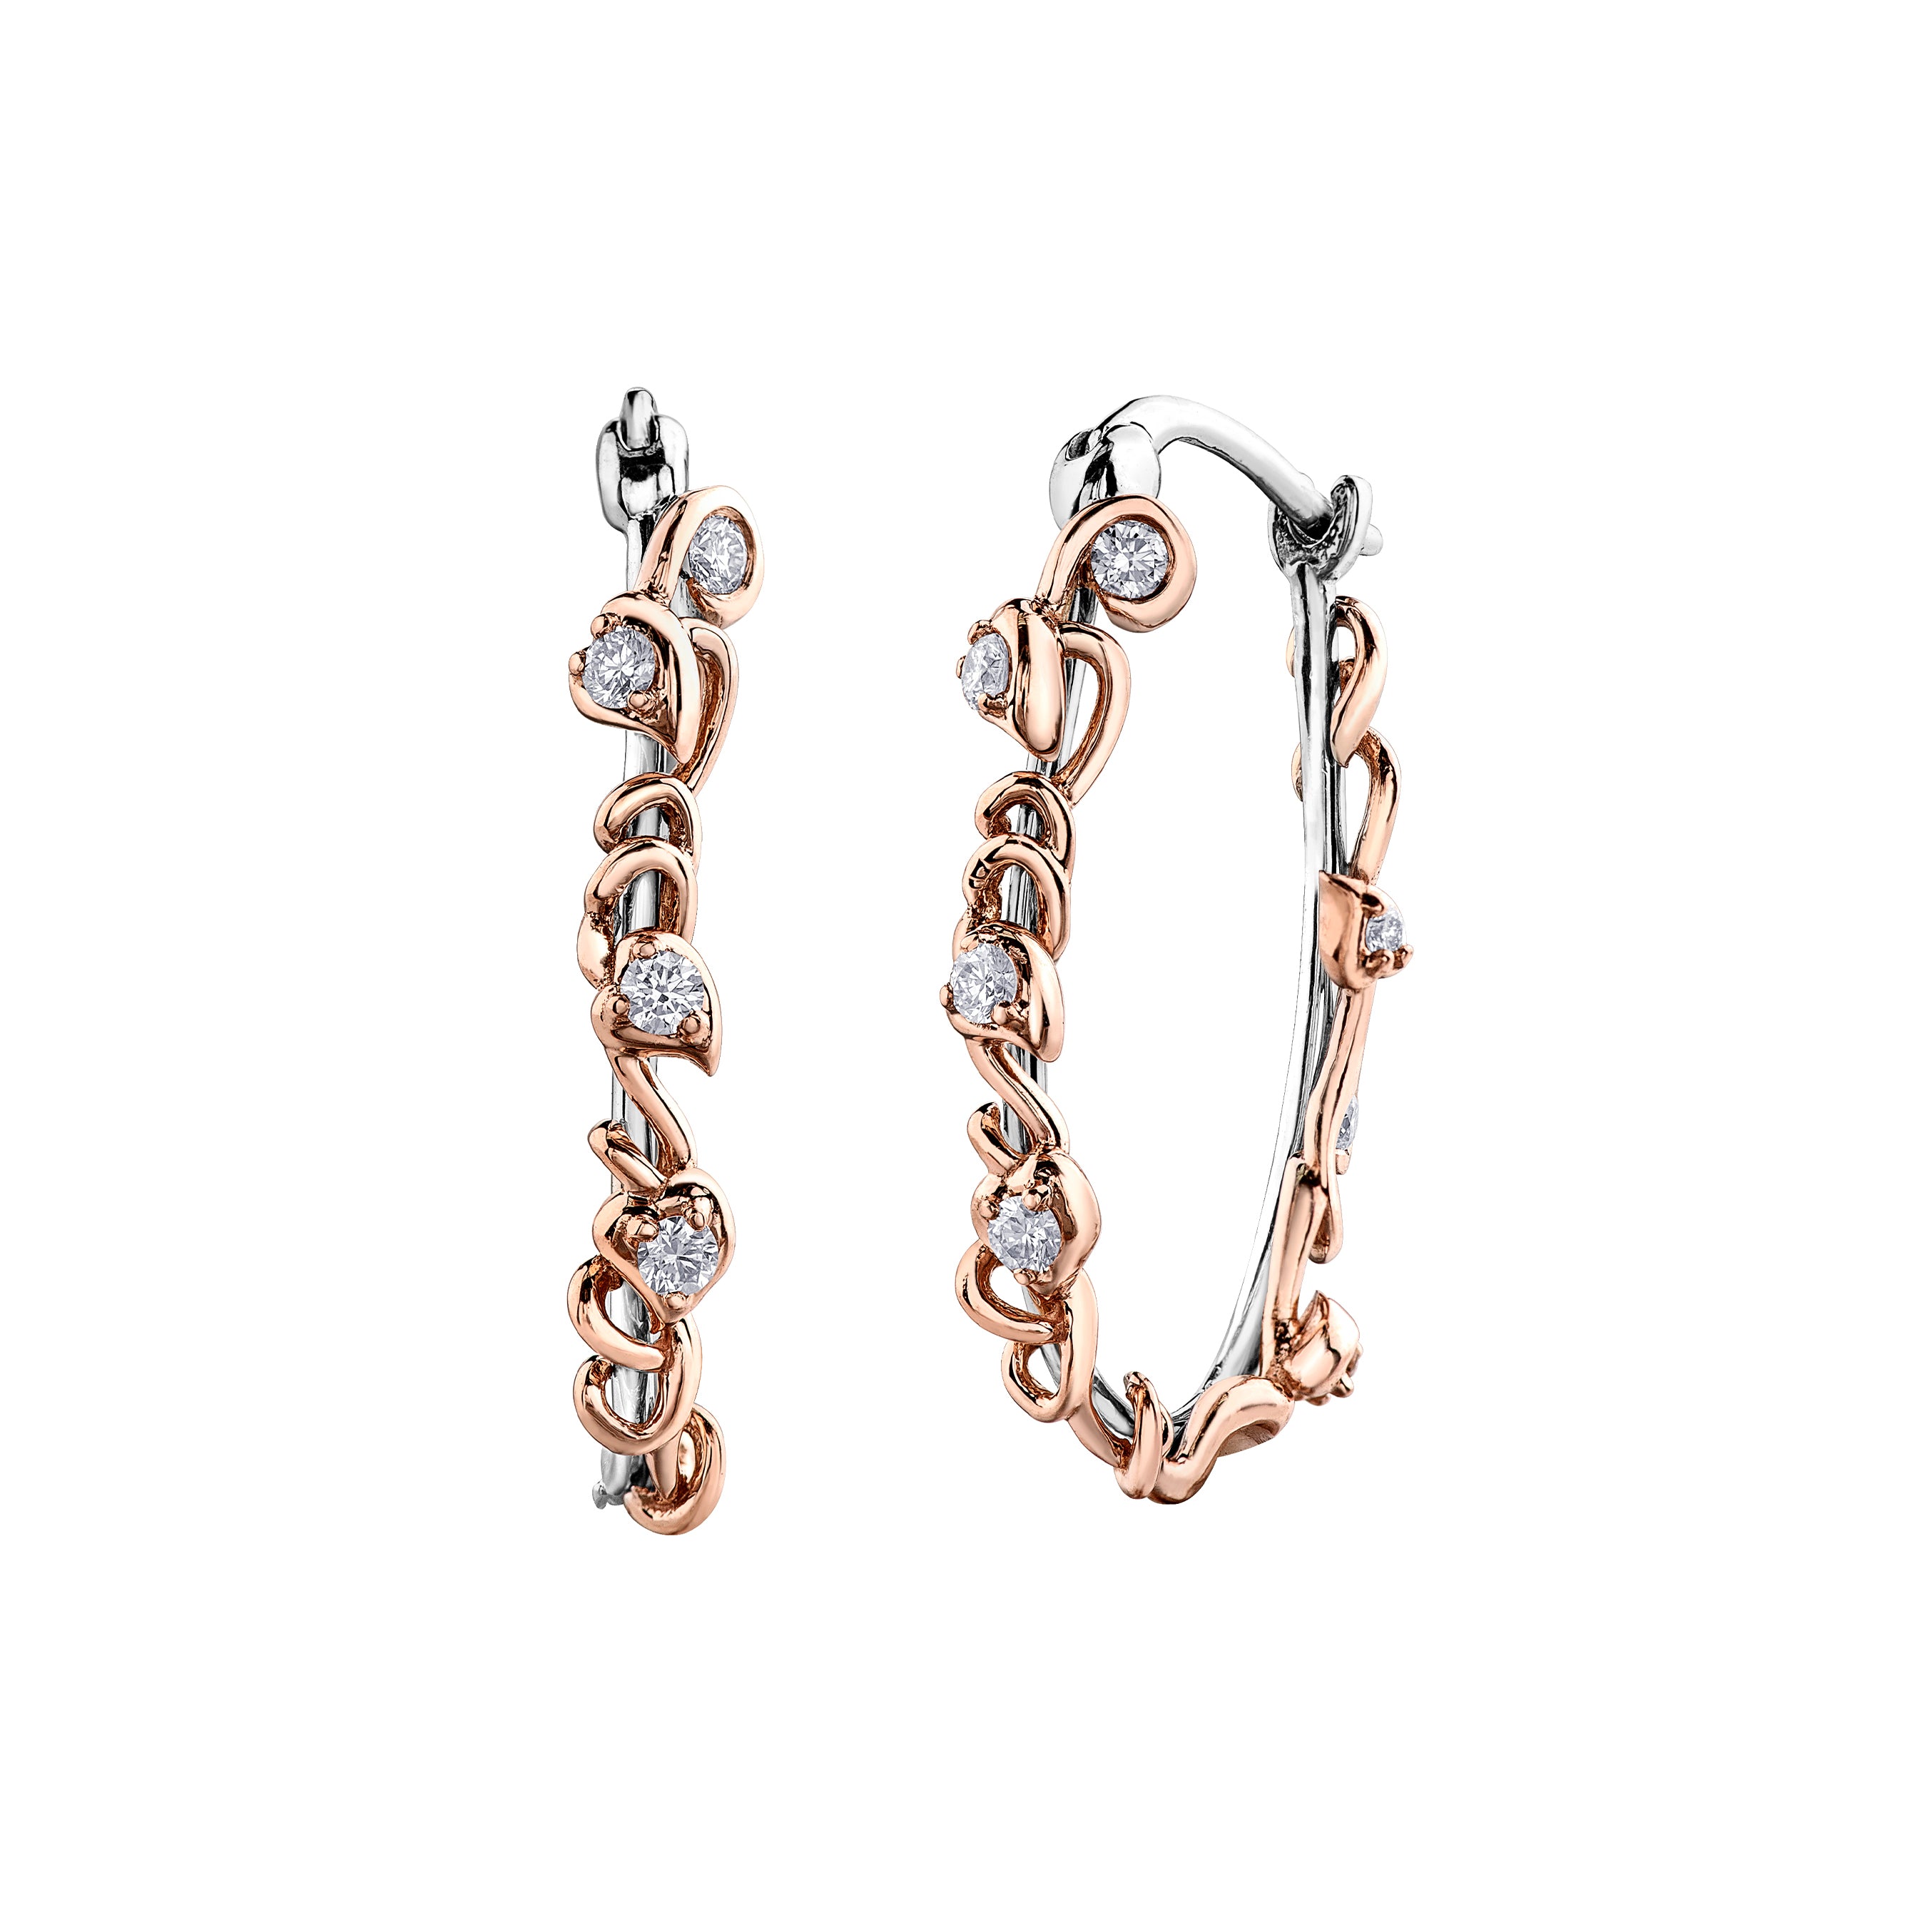 Crafted in 14KT white Certified Canadian Gold, these hoops earrings are wrapped with 14KT rose Certified Canadian Gold ivy vines set with round brilliant-cut Canadian diamonds 